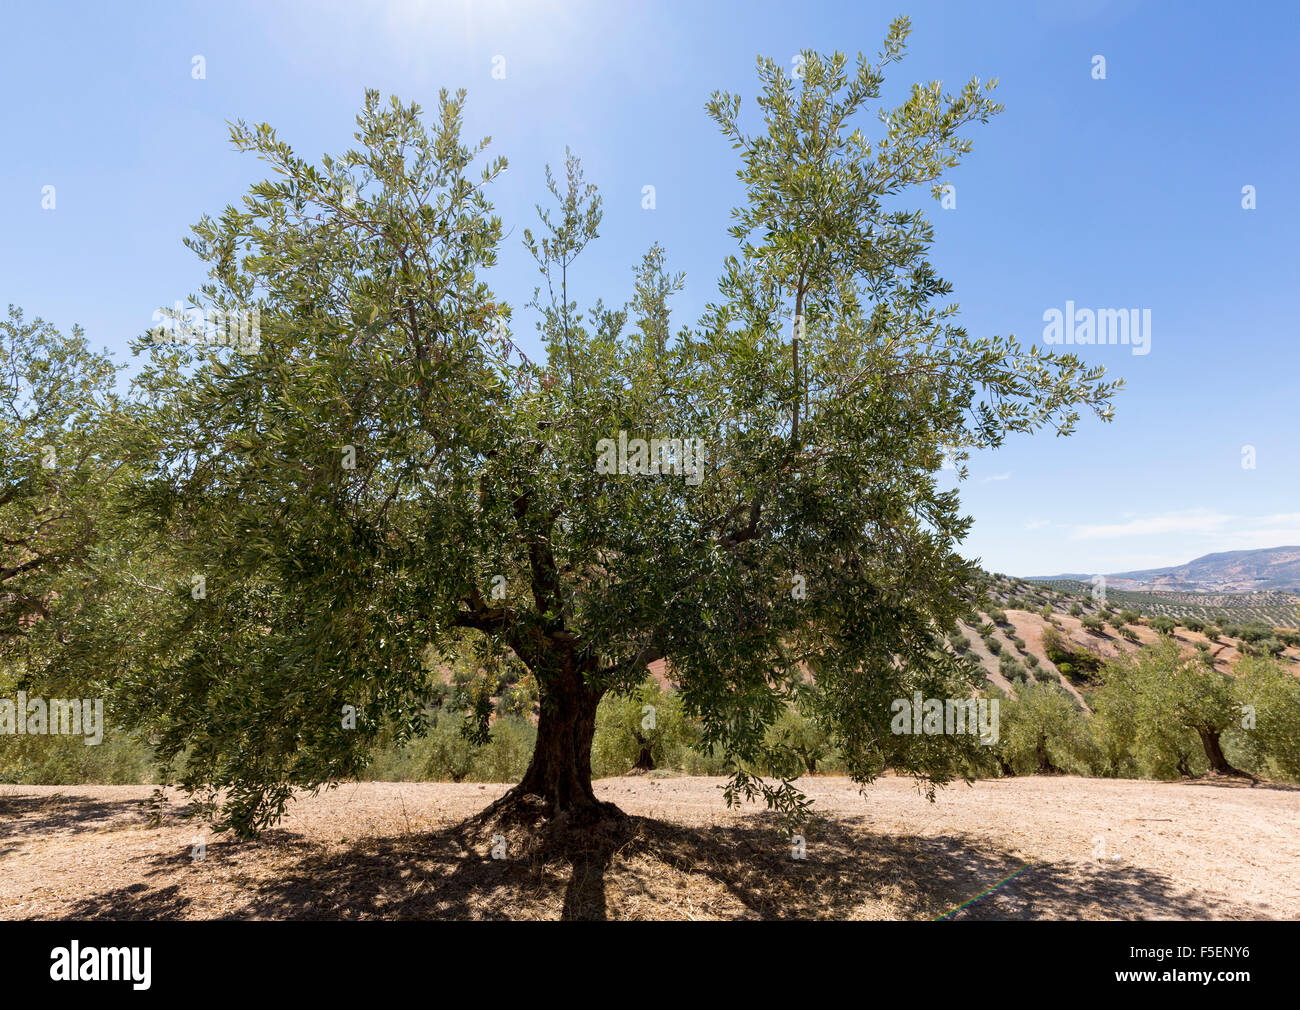 Olive tree in Andalucia, Spain Stock Photo